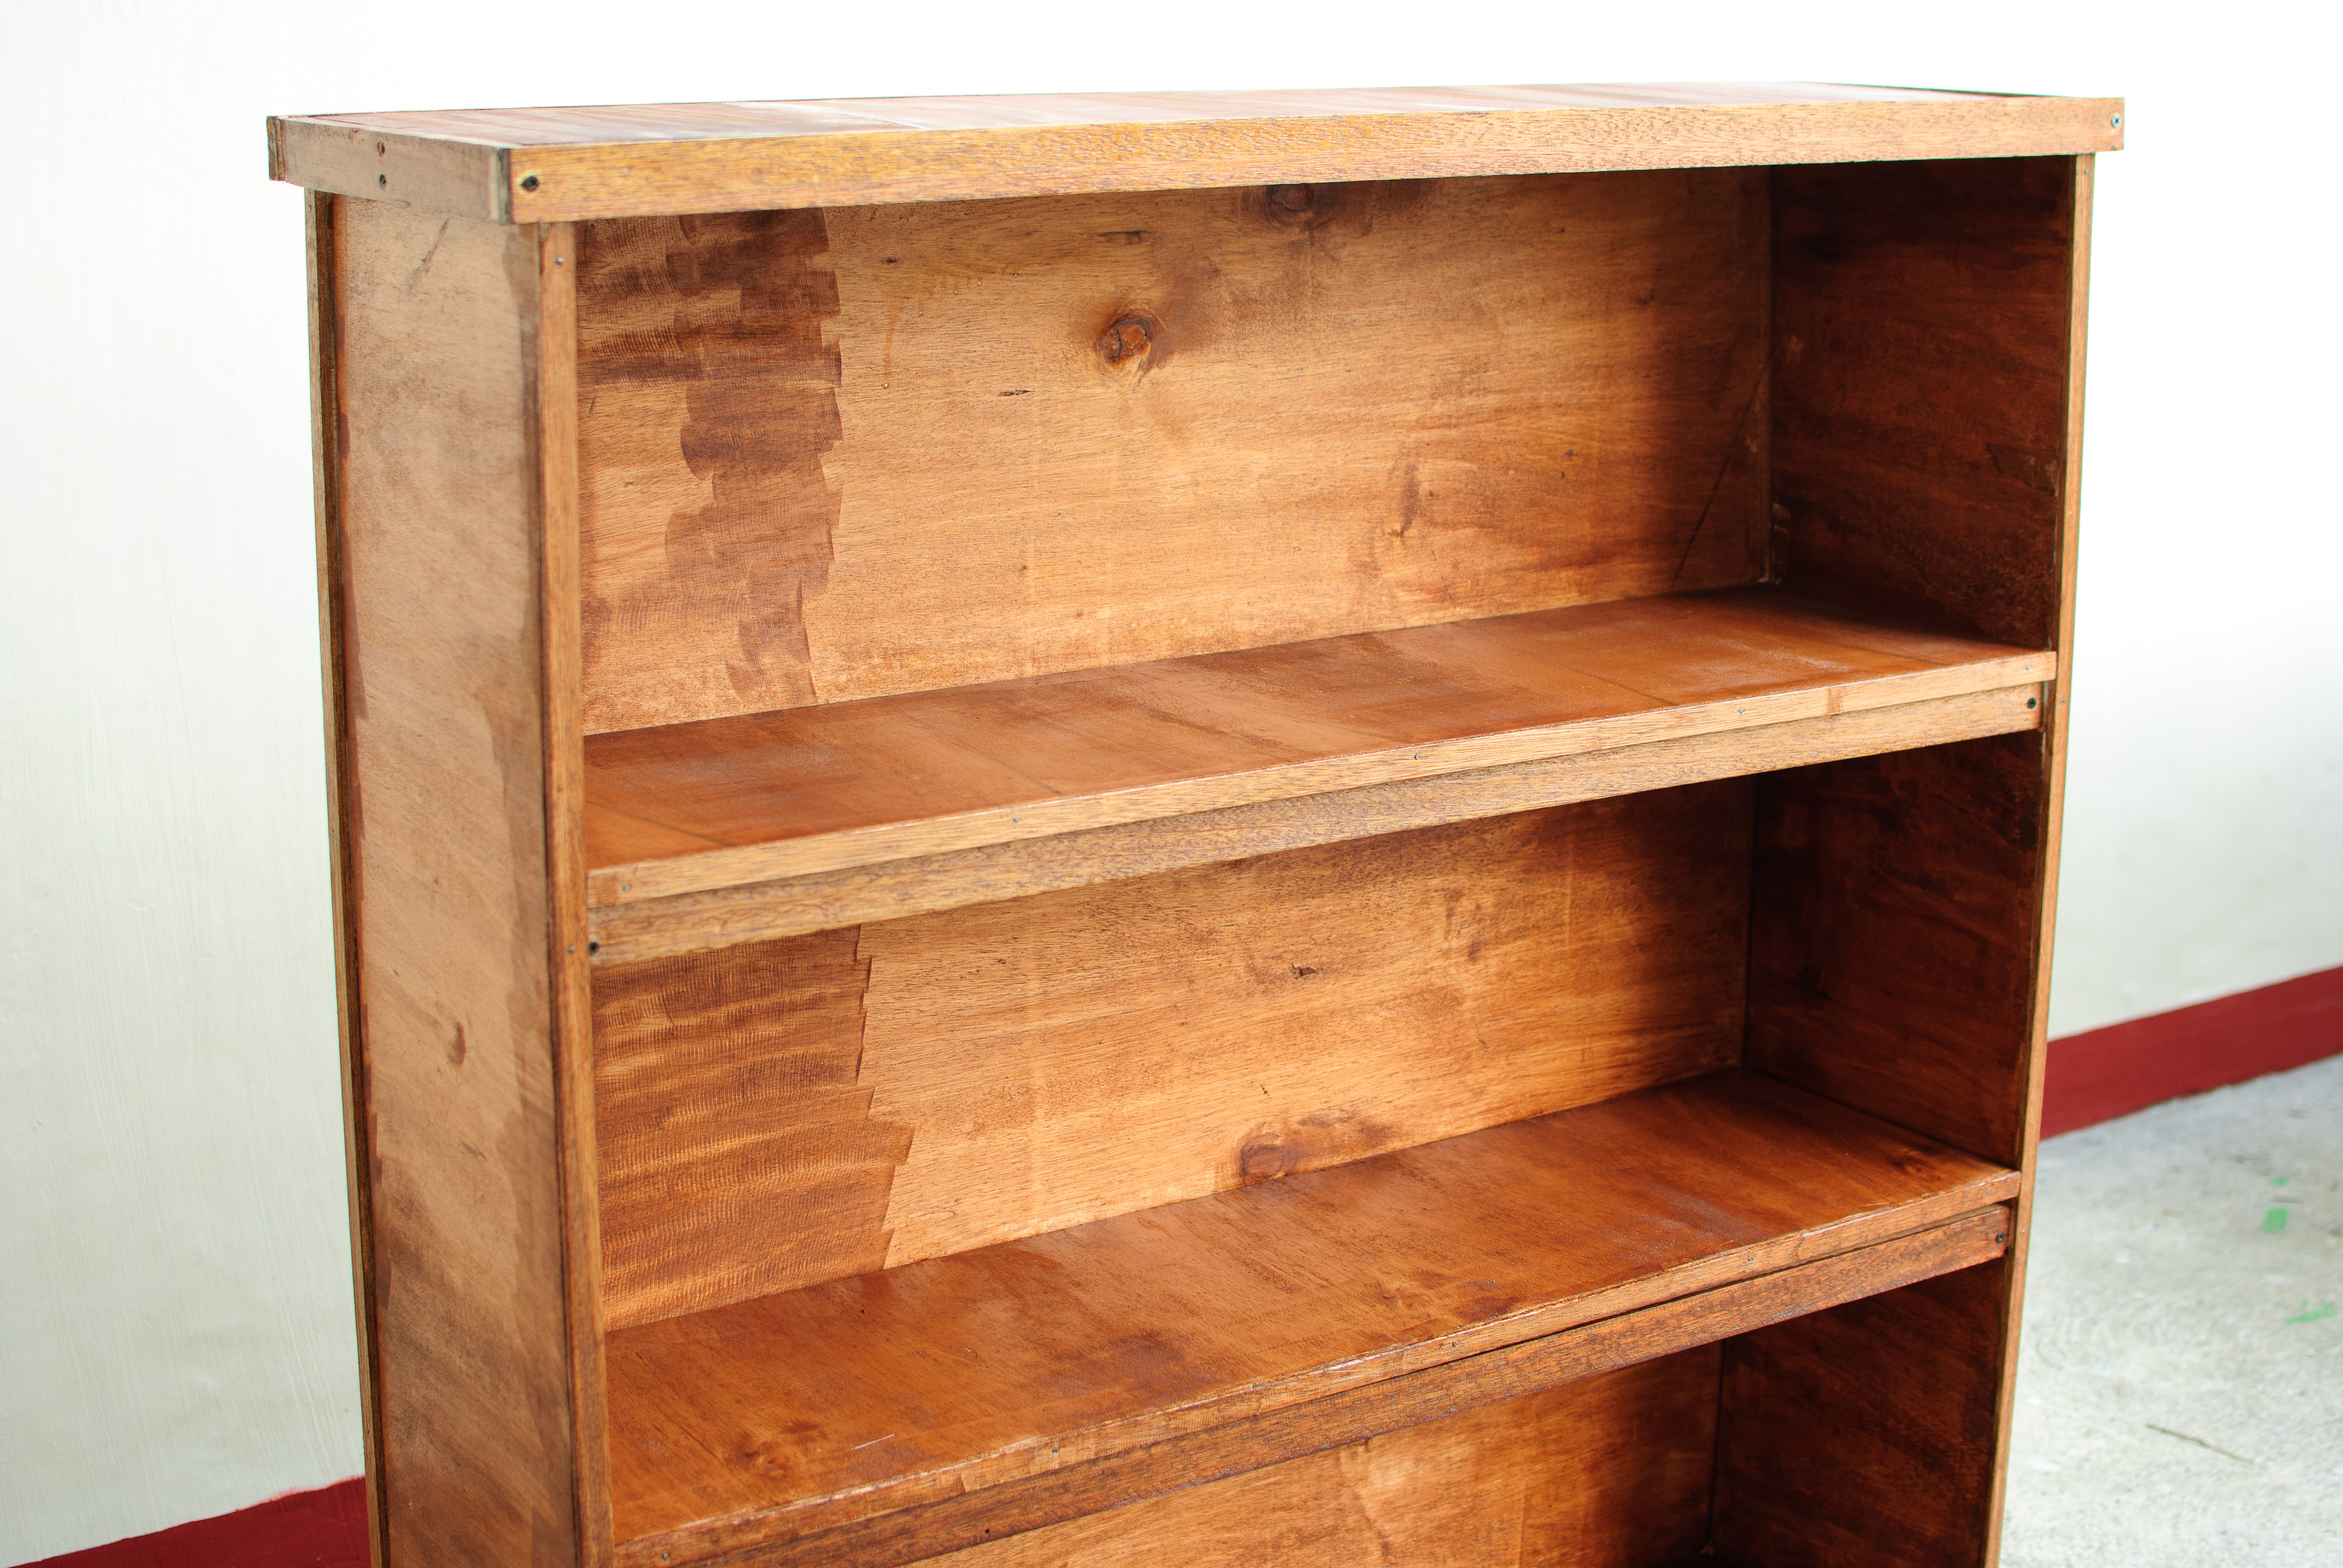 How to Build Wooden Bookshelves: 7 Steps (with Pictures)